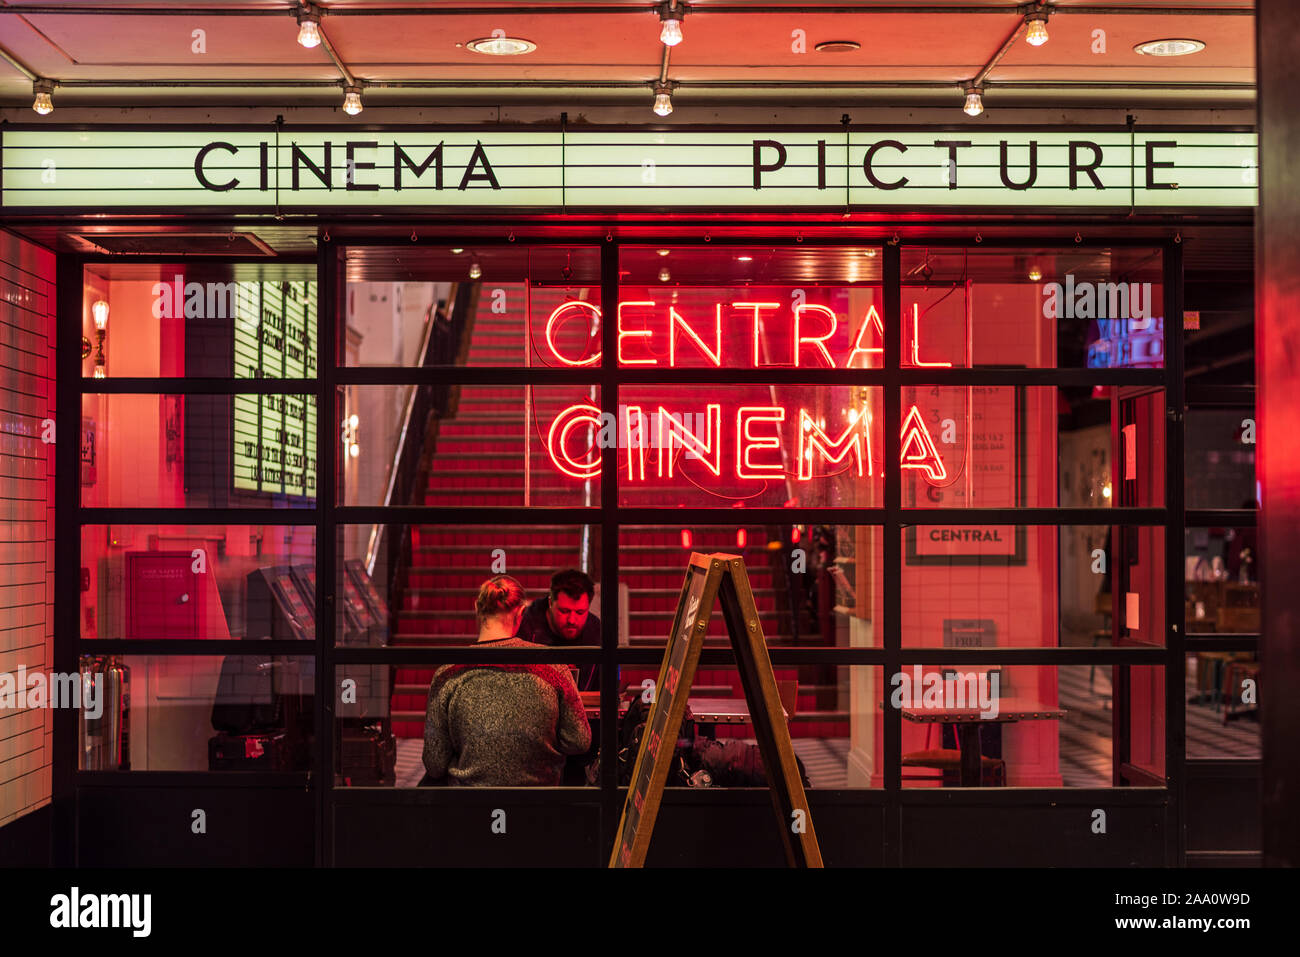 PictureHouse Kino Foyer - PictureHouse Central Kino in der Nähe von Piccadilly Circus in London's West End Stockfoto